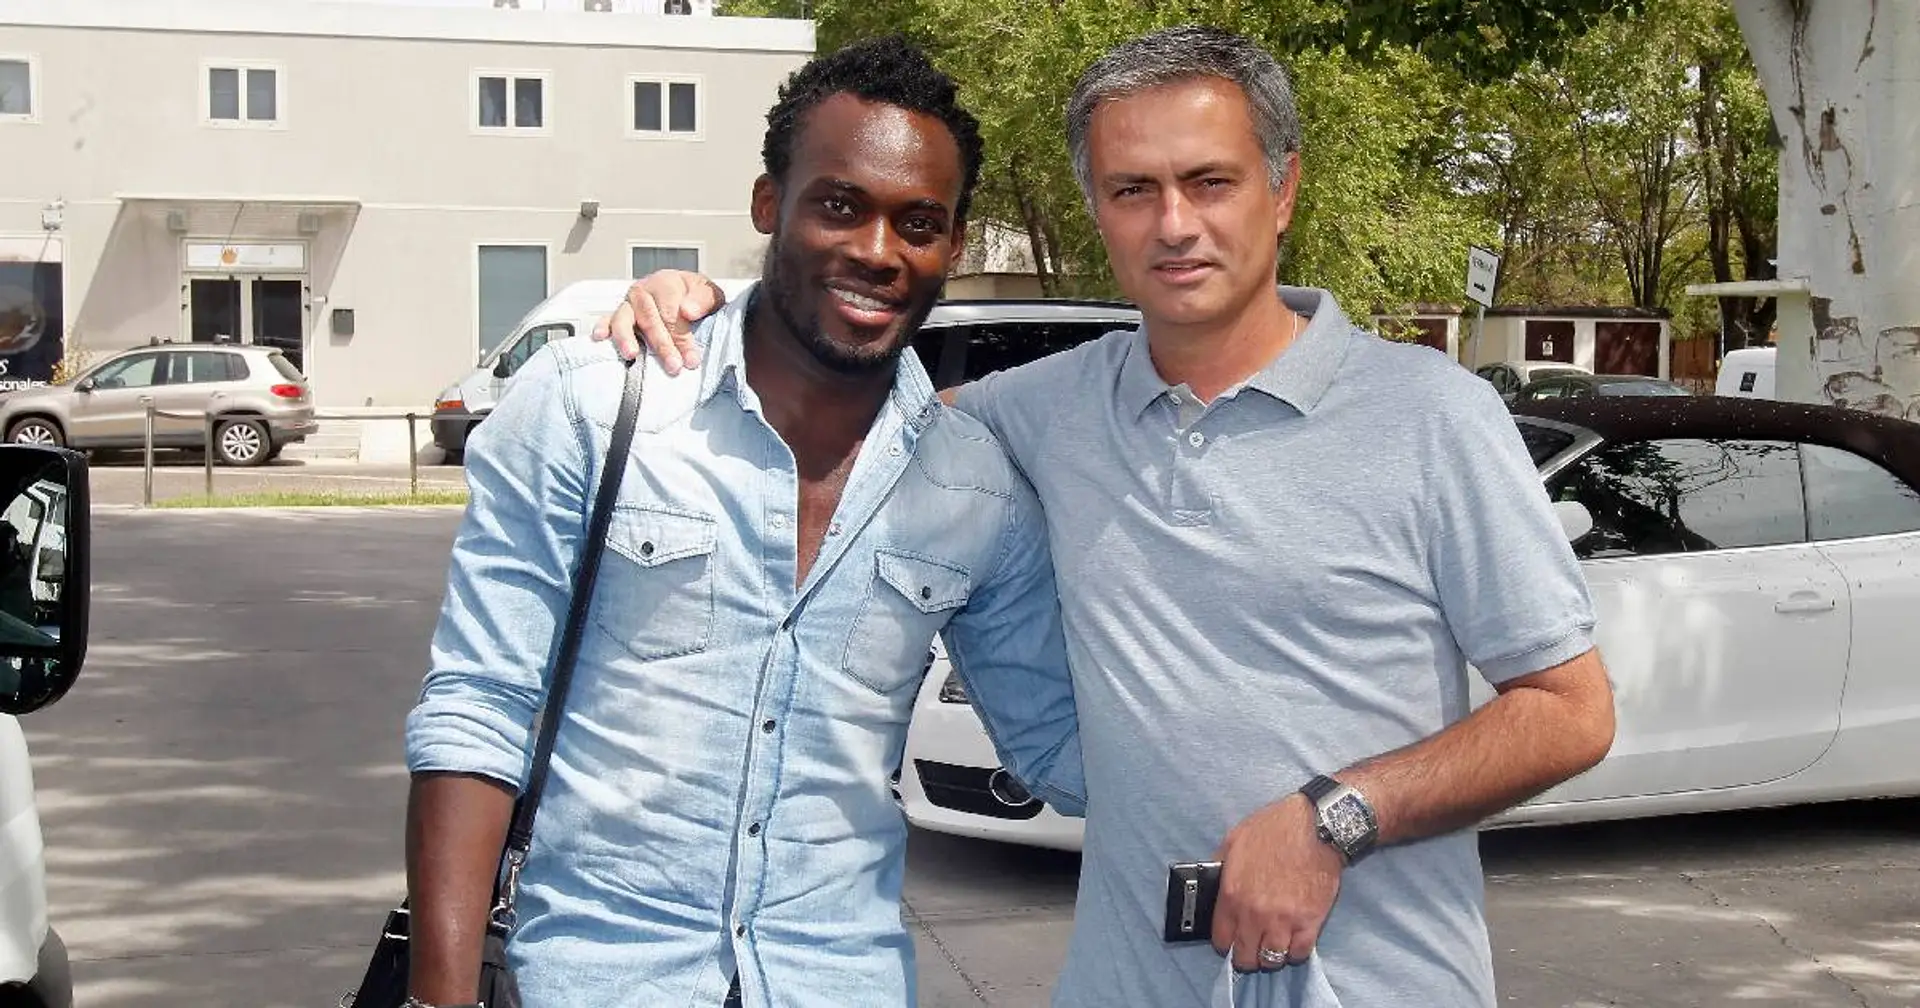 'He's not my player, he's my son': Mourinho-Essien link is so strong Jose fell in love with Ghana thanks to his player